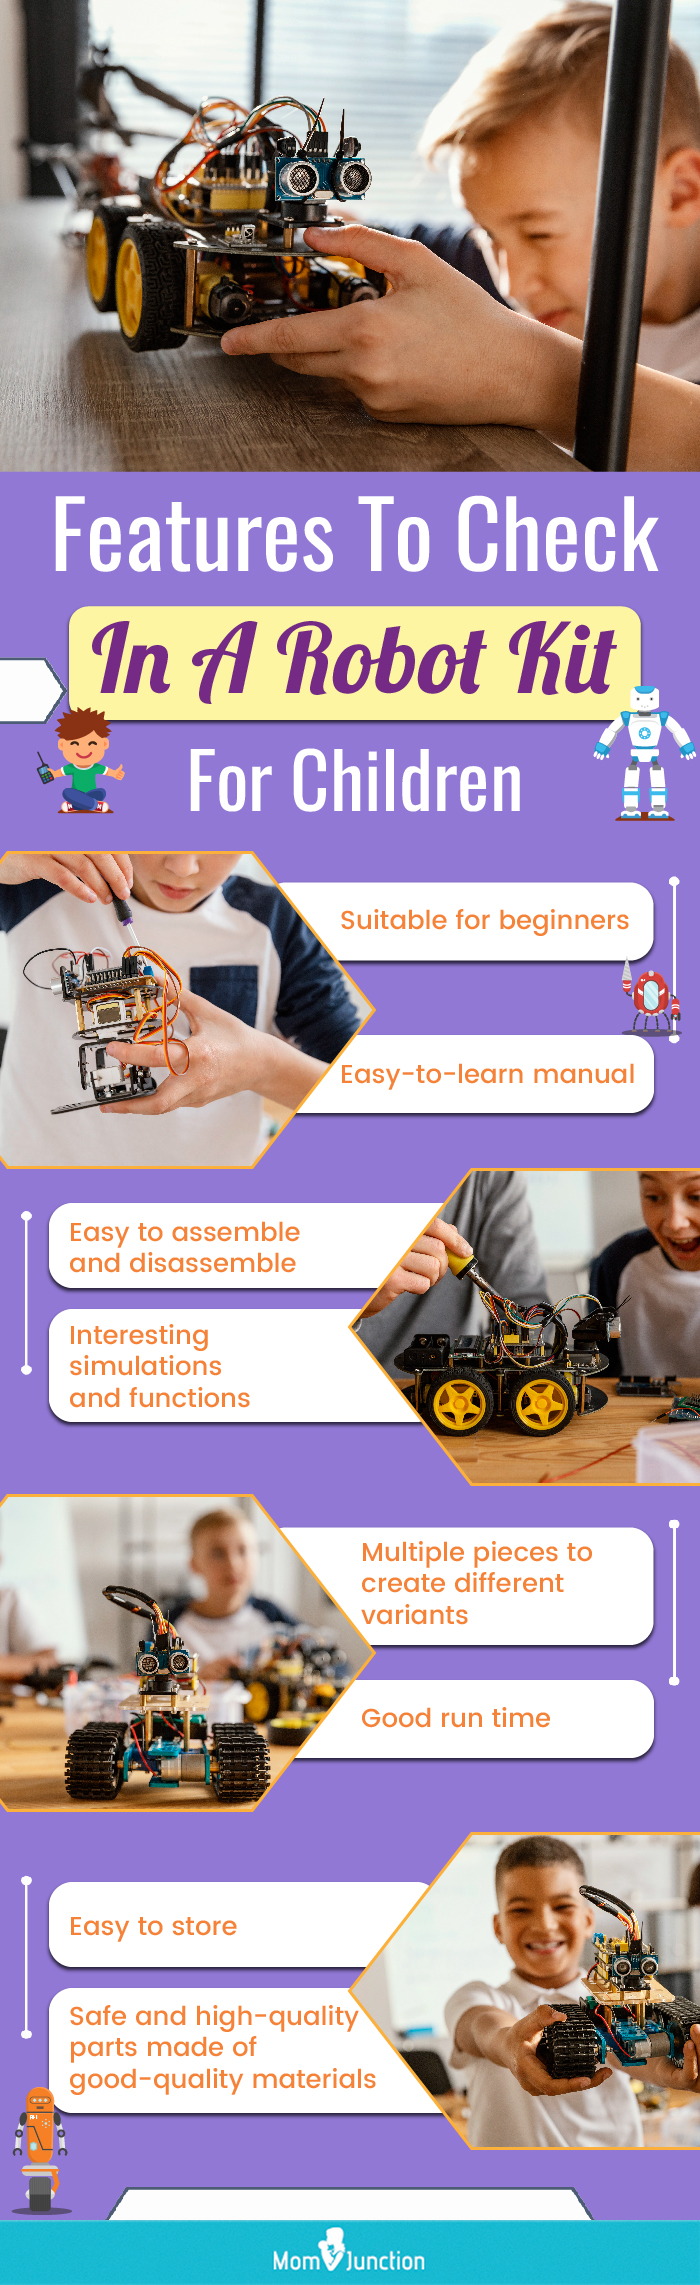 https://cdn2.momjunction.com/wp-content/uploads/2021/11/Features-To-Check-In-A-Robot-Kit-For-Children.jpg